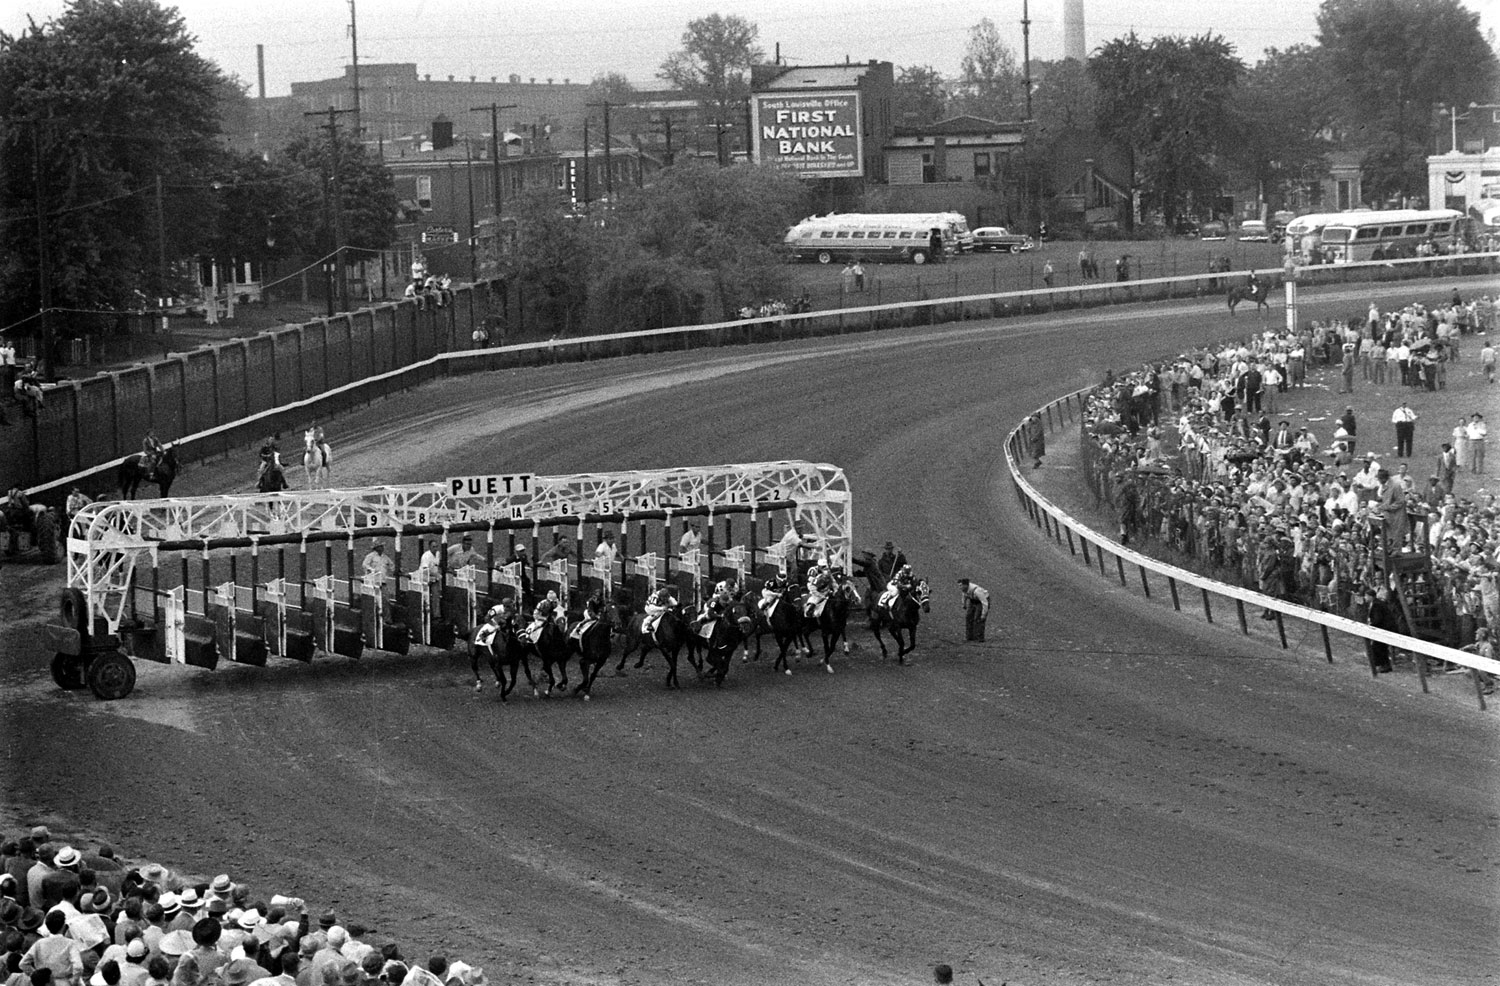 Starting gate at Churchill Downs on Derby day, 1955. Eventual winner Swaps is #7, favorite Nashua is #5.